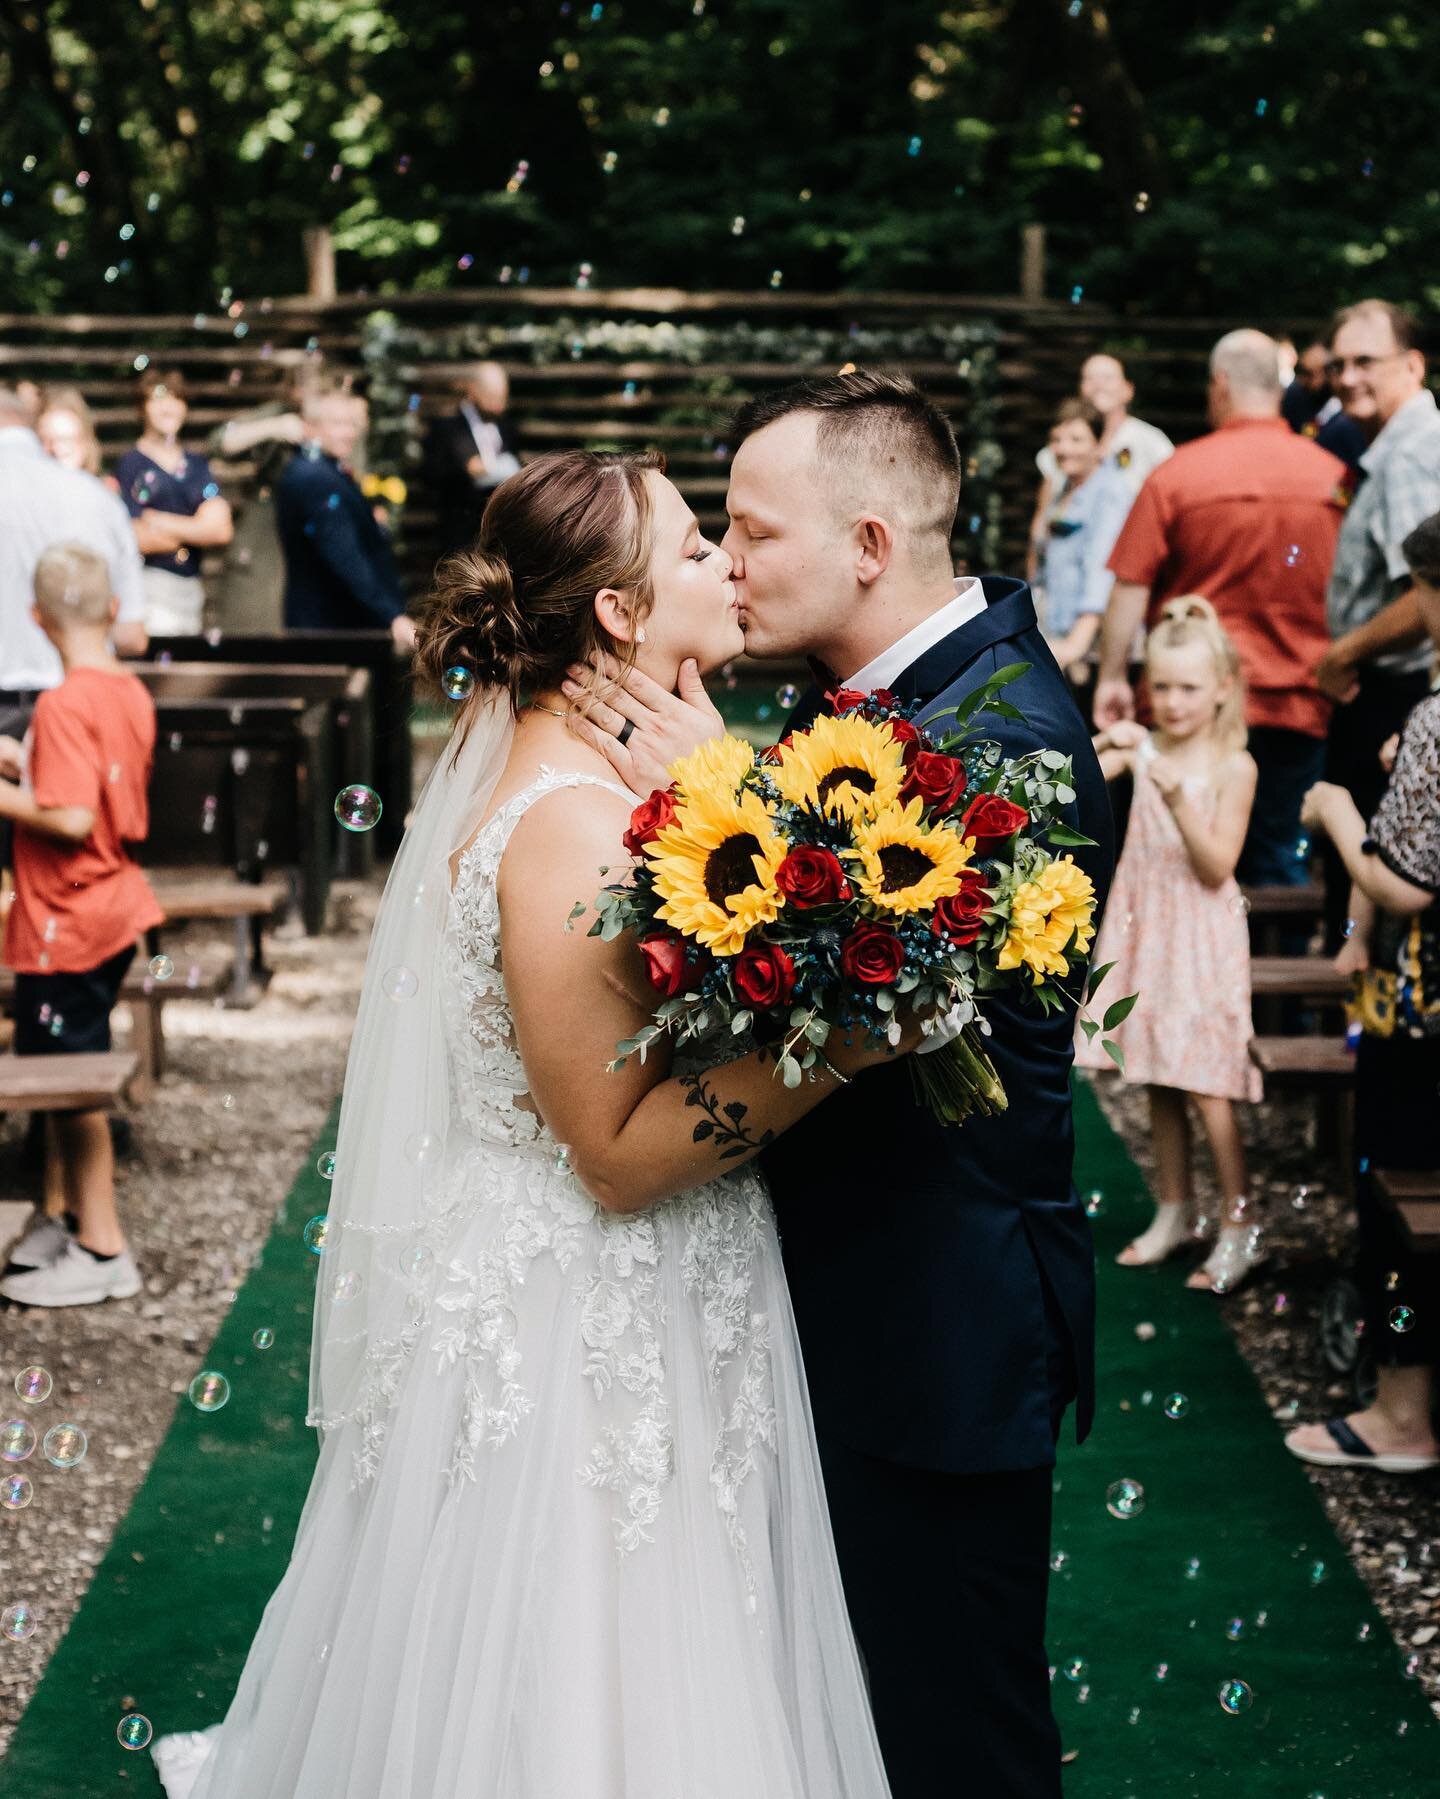 We&rsquo;ve said it once and we&rsquo;ll say it again: WE LOVE WEDDINGS! We had the honor of celebrating Abrialle and Payton yesterday! 

Their special day was complete with vibrant flowers, personalized vows, and a sweet bubble exit from their cerem